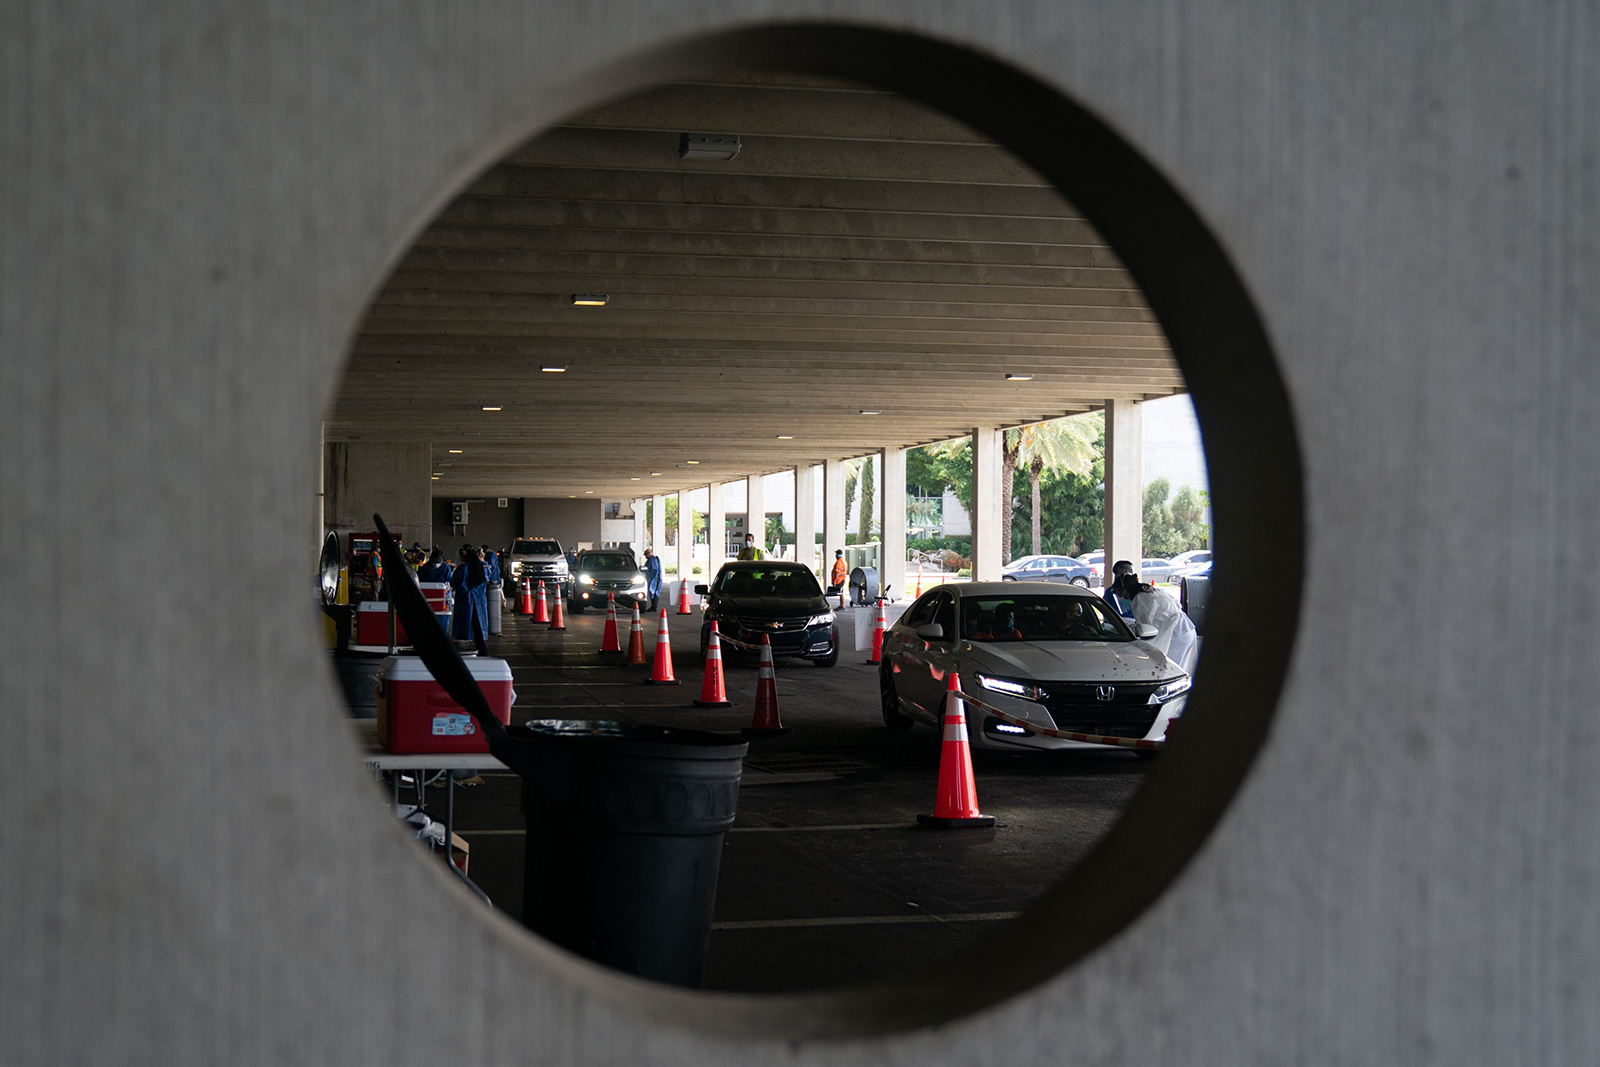 People get tested for Covid-19 at a drive-thru testing site at the Mahaffey Theater in St. Petersburg, Florida, on July 24. 